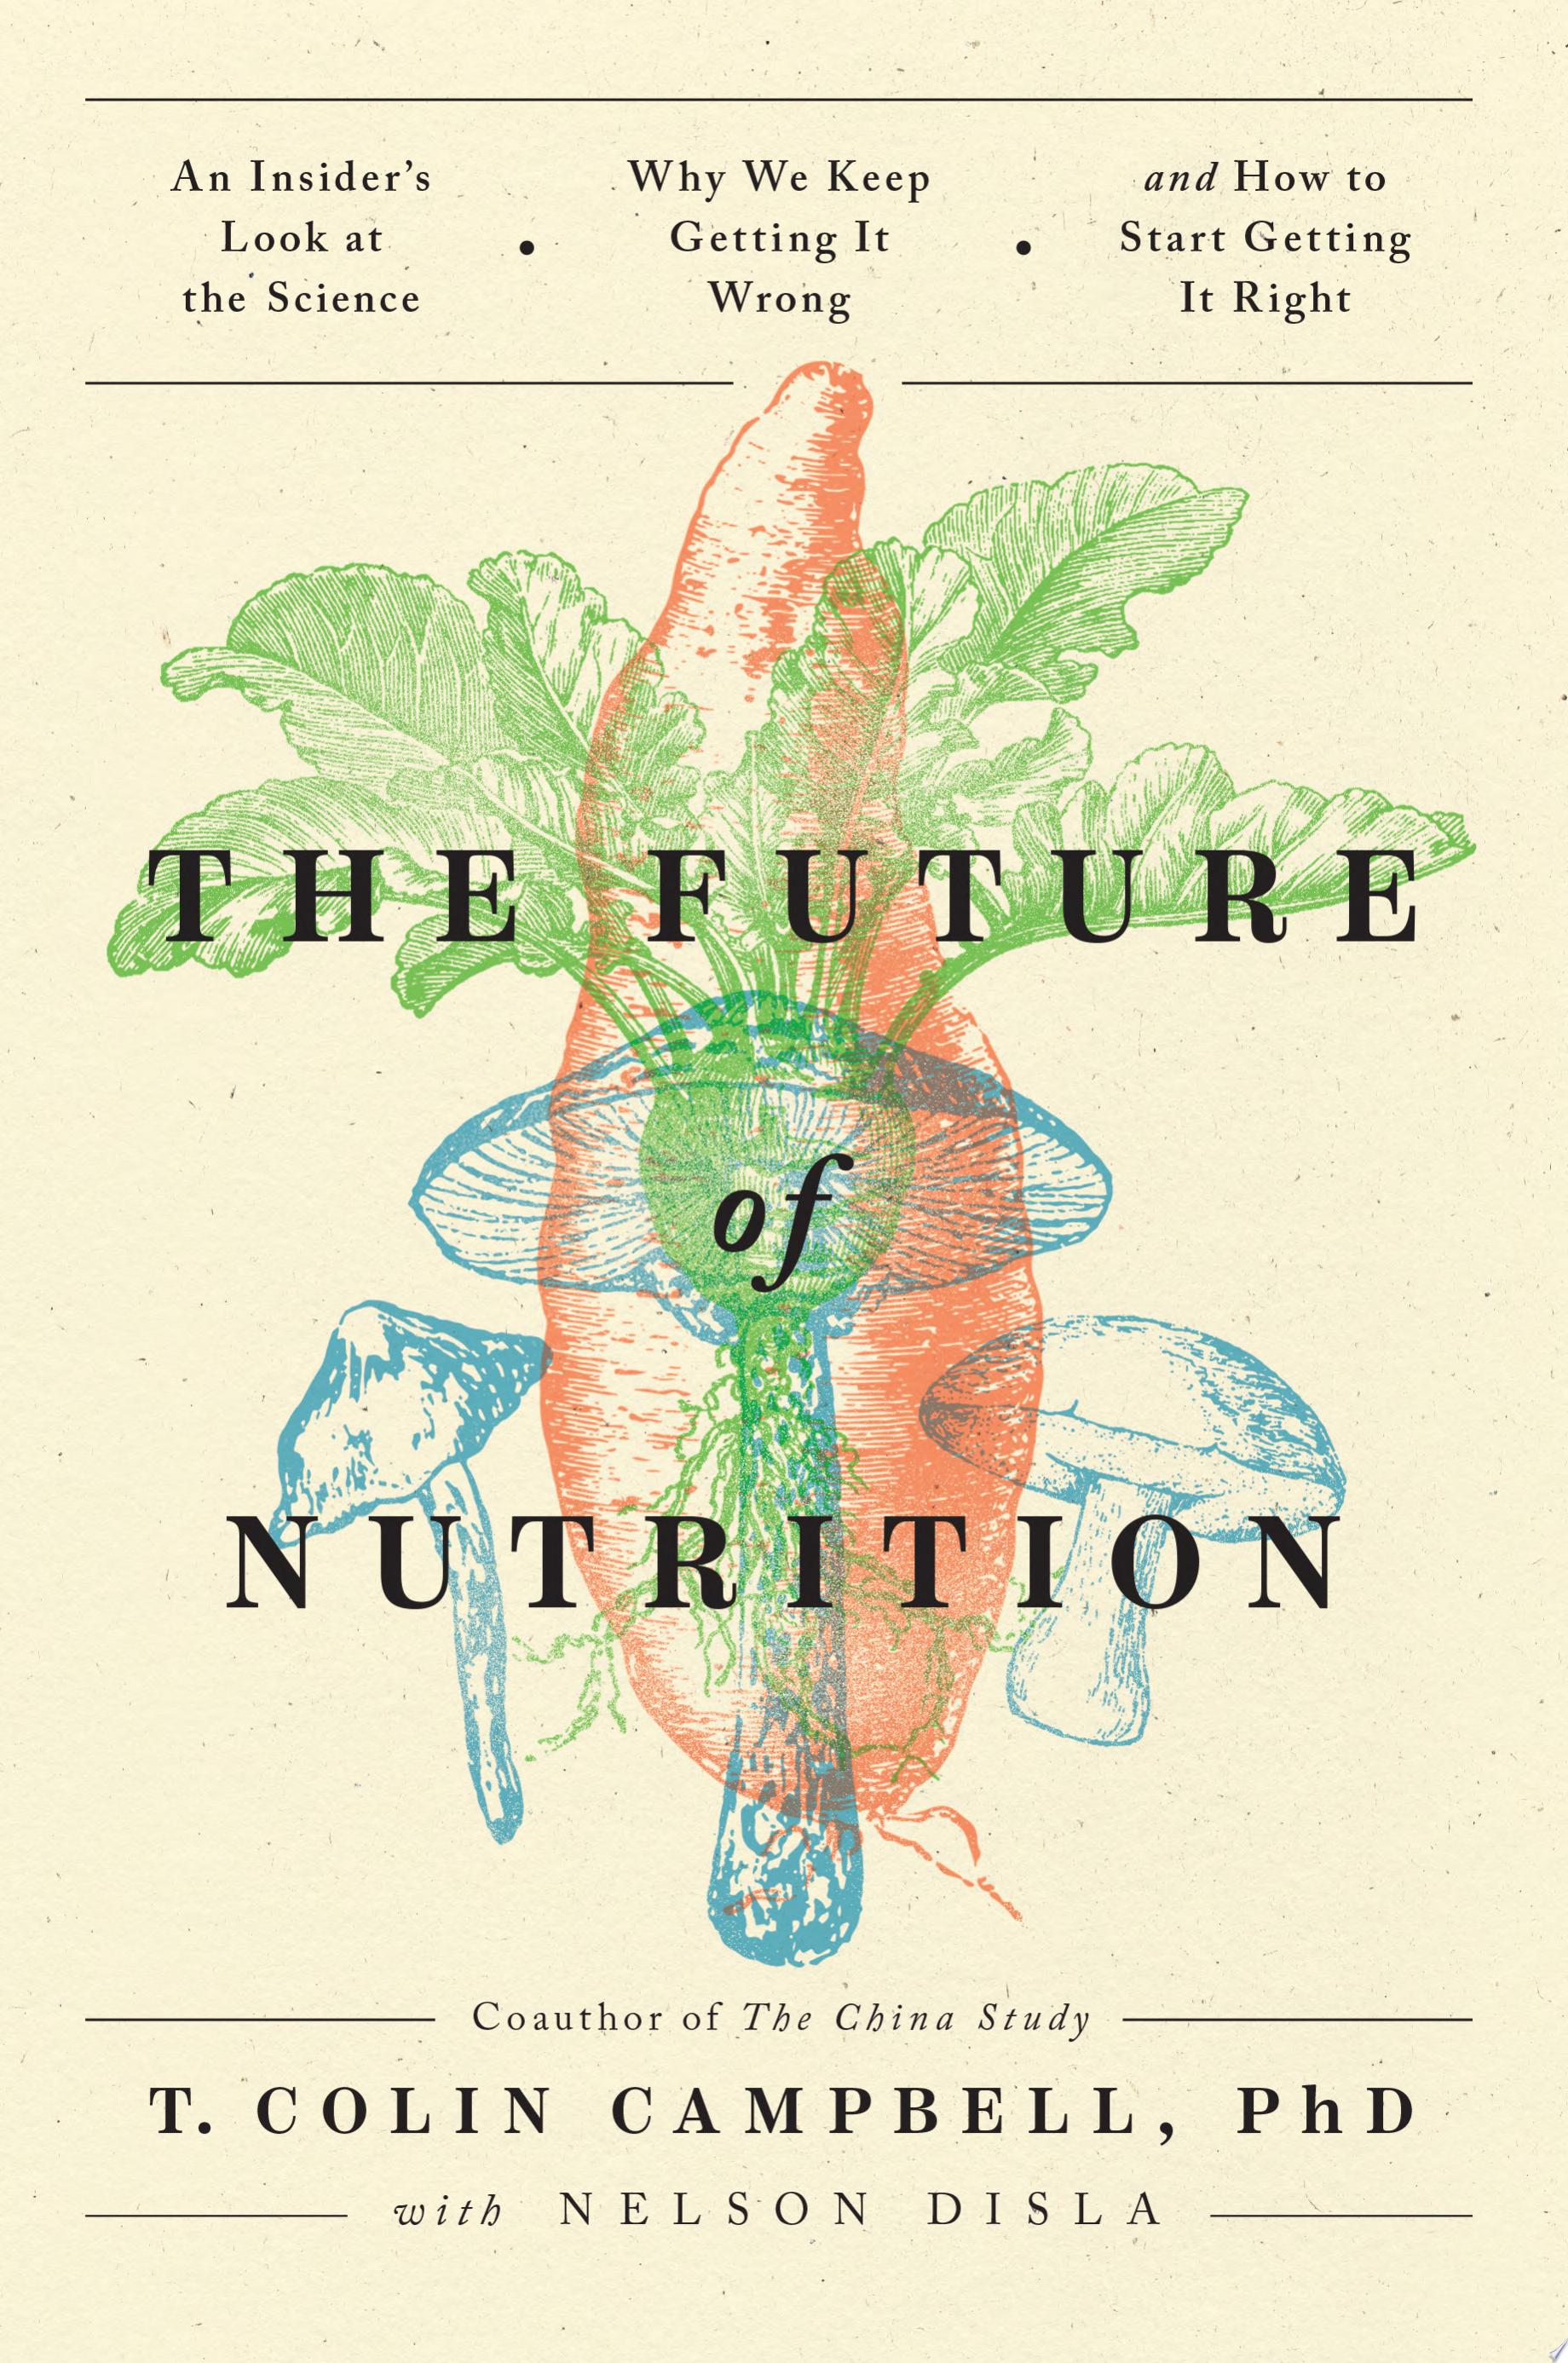 Image for "The Future of Nutrition"